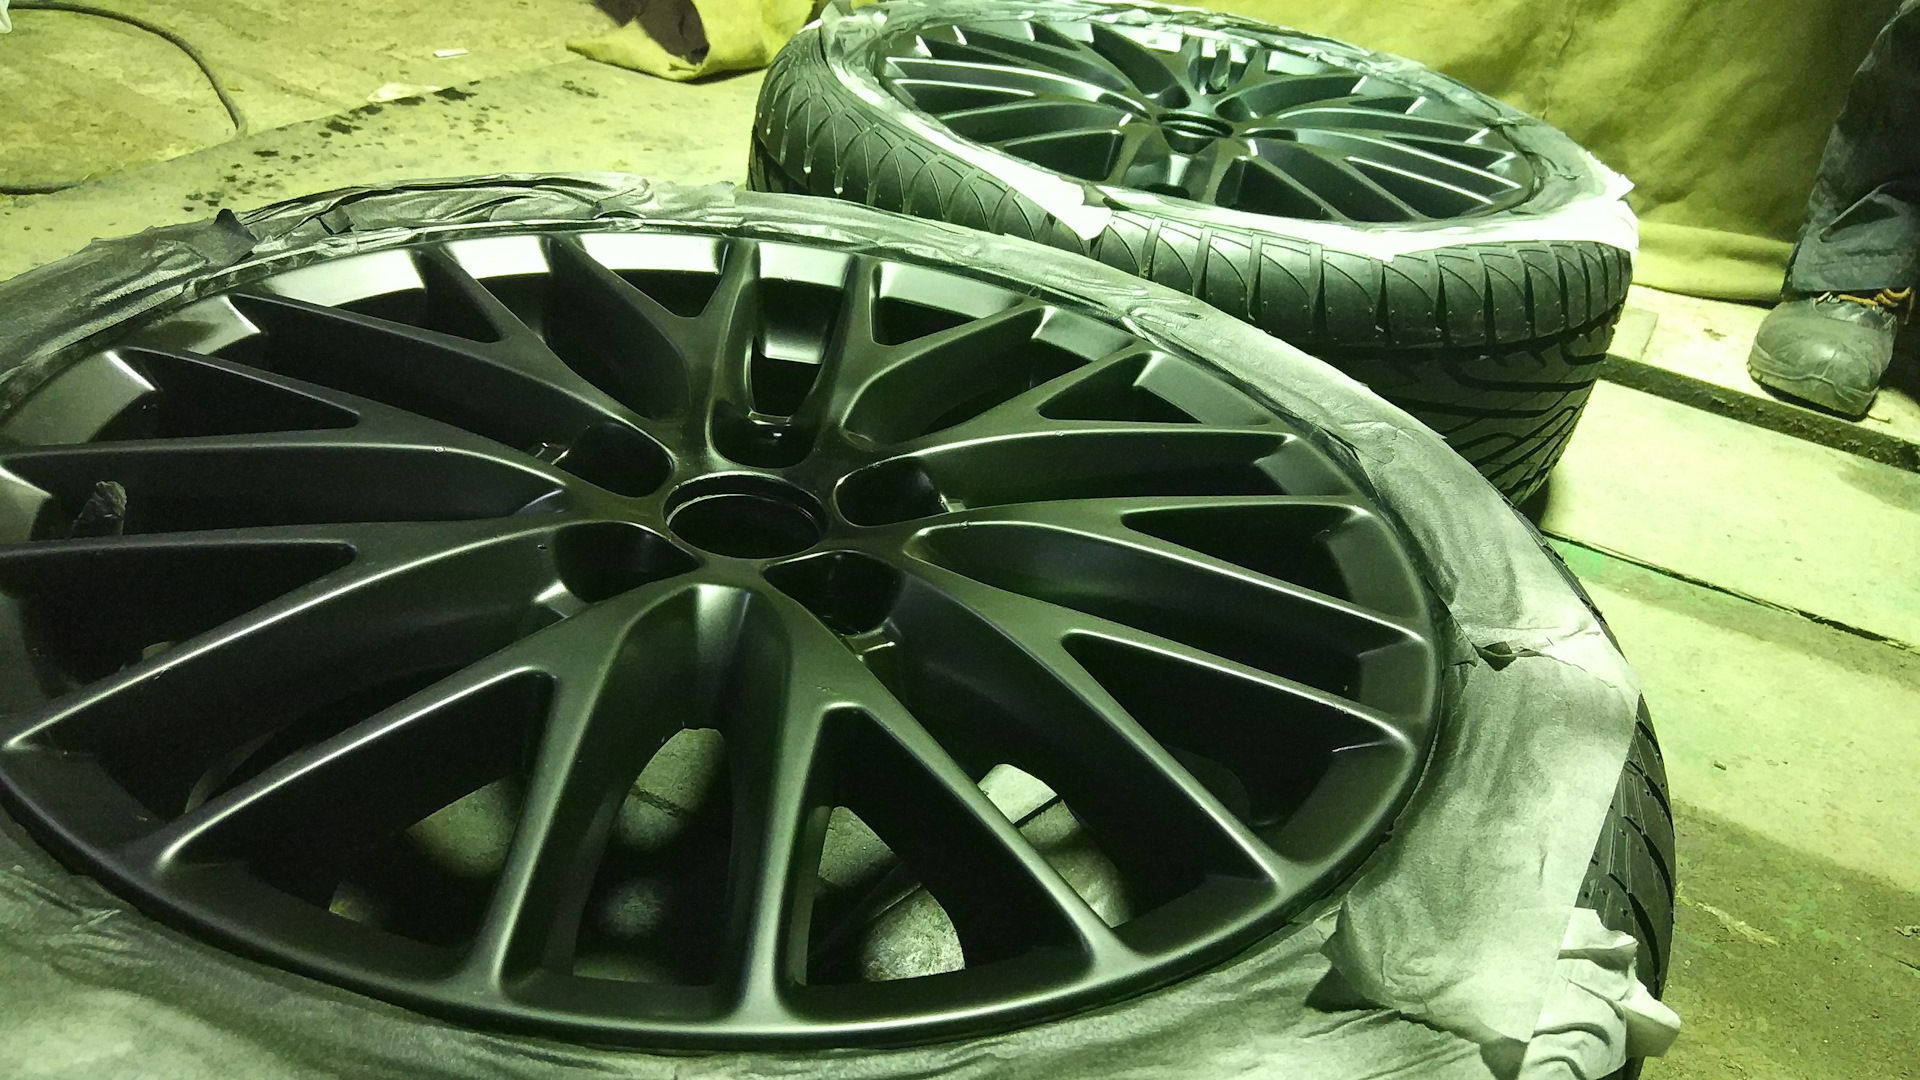 Maxxis 225/45r17 ma-z3. Ford Focus r17 225/45. Резина 225 45 17 на Форд фокус 3. Покрышки r17 225/45 Форд фокус 2. Купить резину на форд 2